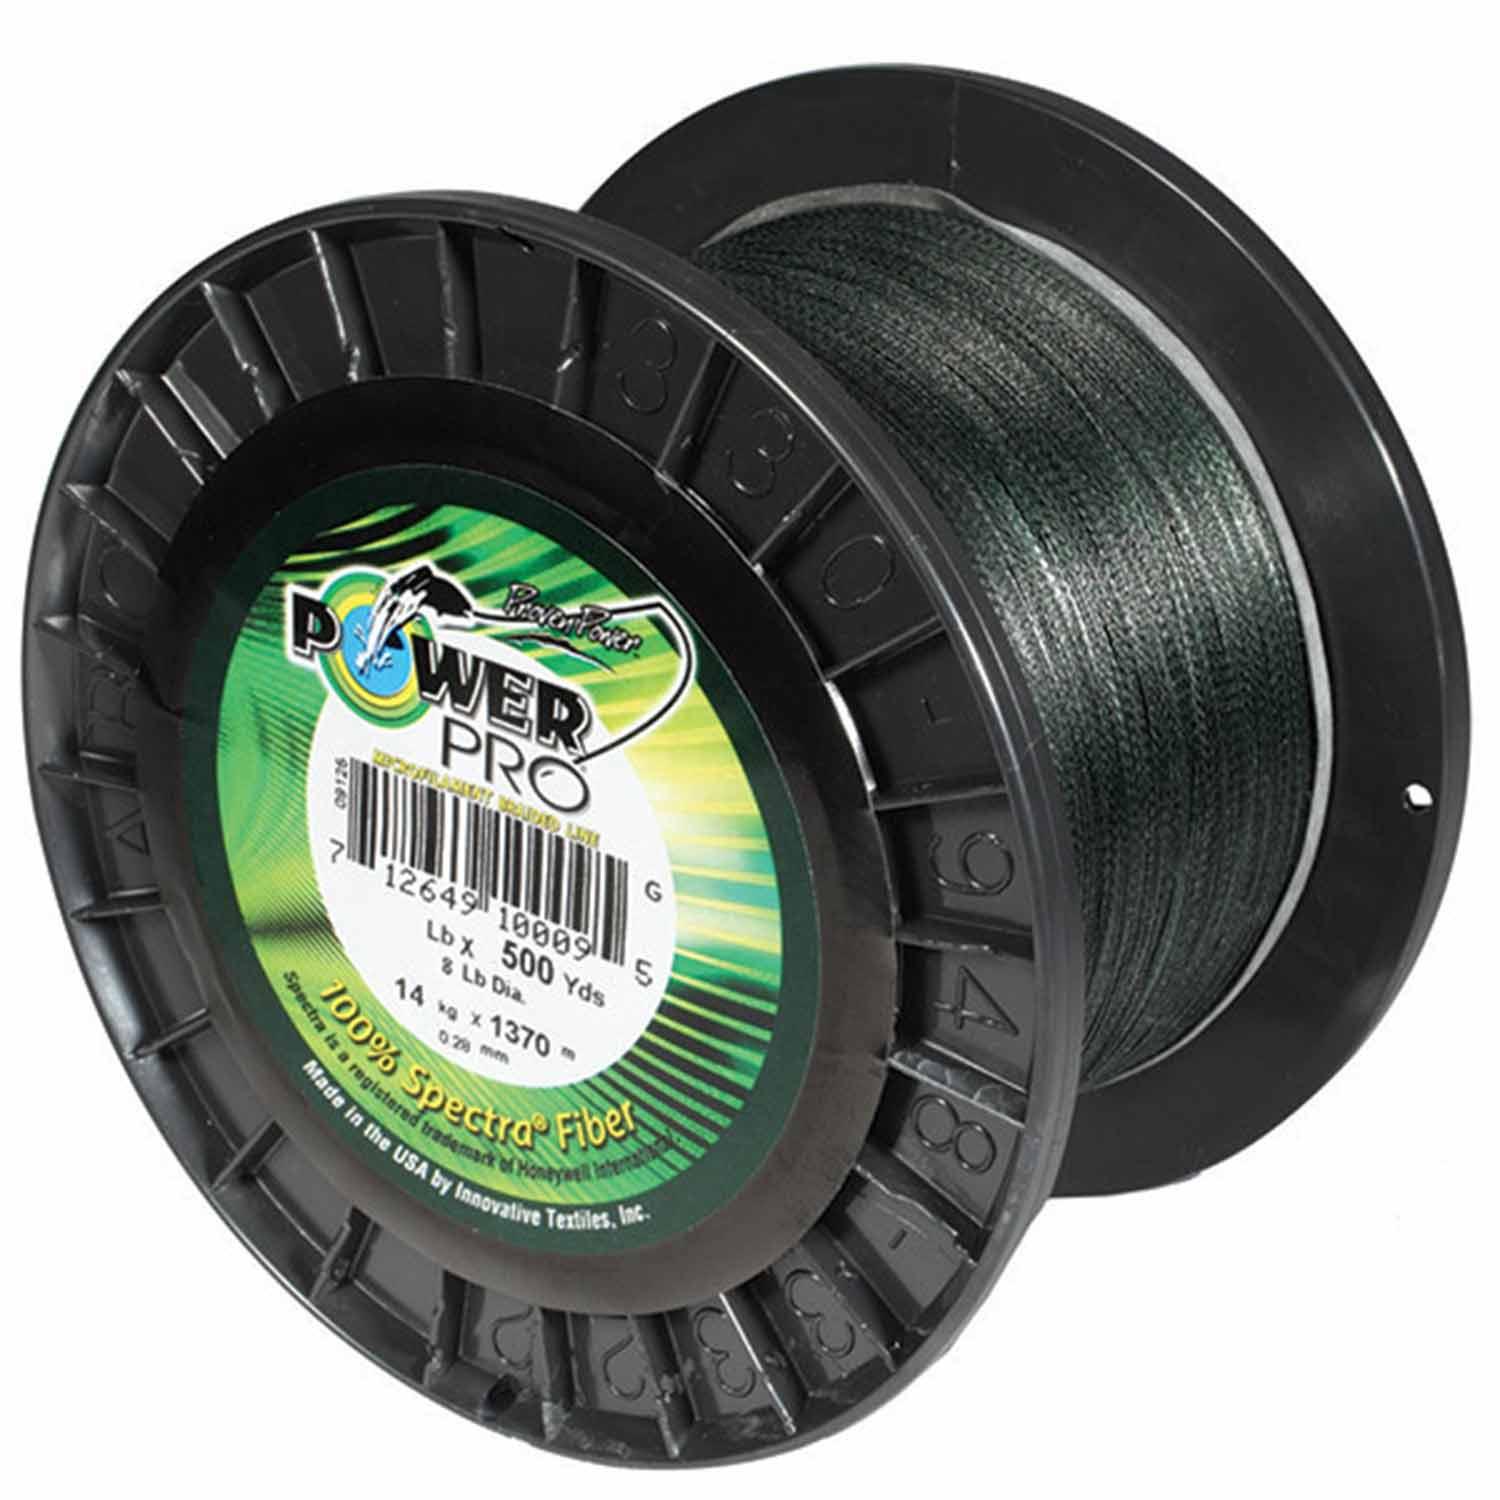 500 lb. Test Braided Spectra Gator/Bowfishing Line *also Great for LEADERS*